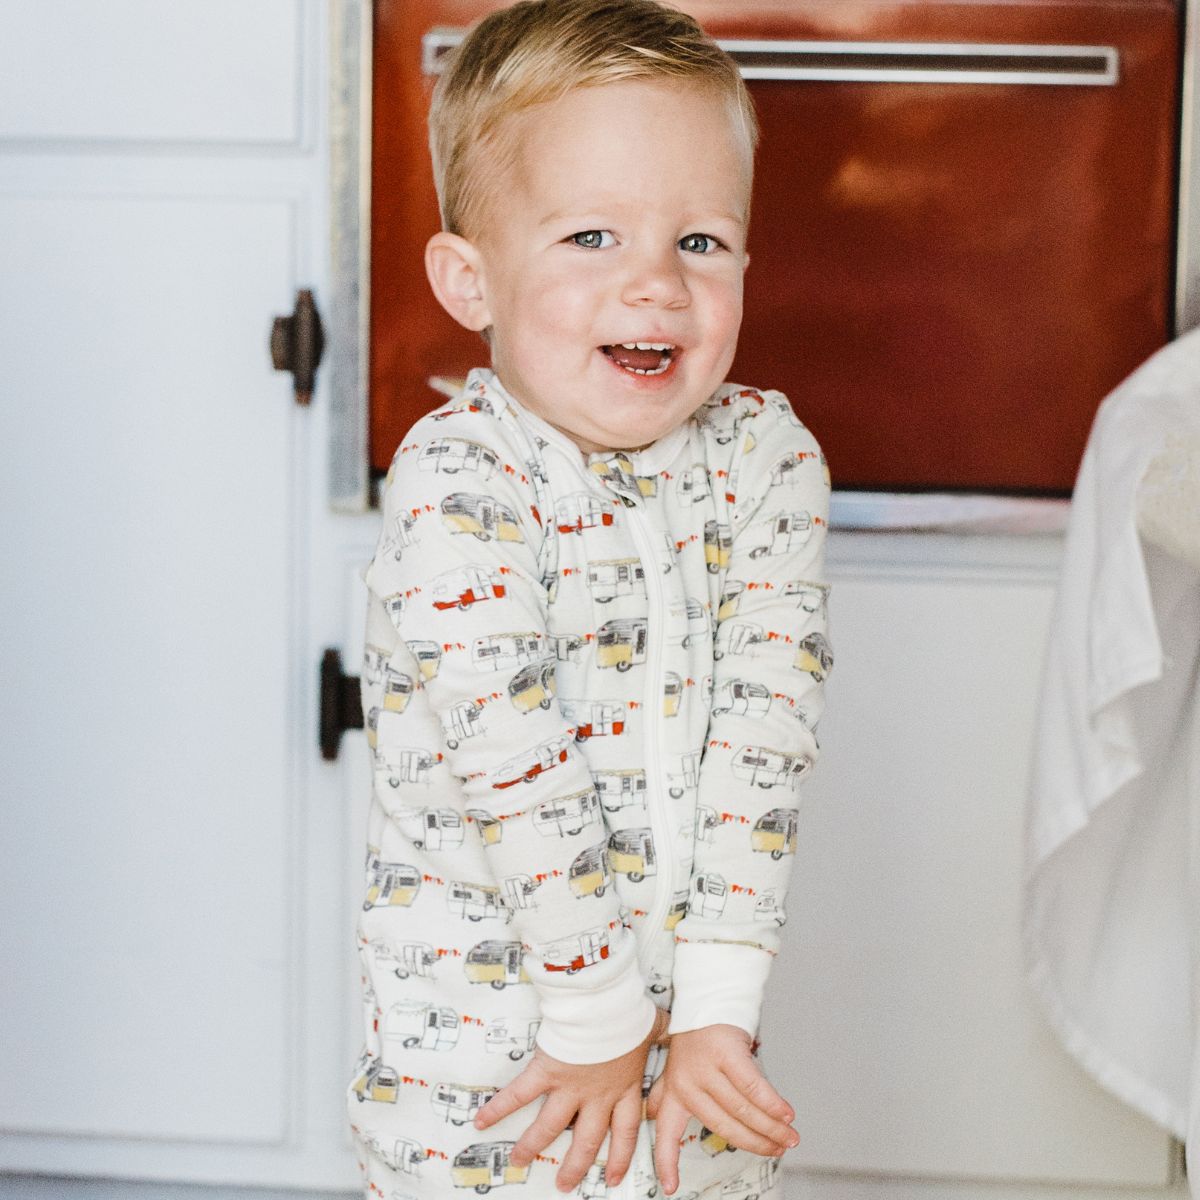 Baby Boy in a vintage trailer wearing the organic zipper pajamas with the vintage trailers print by Milkbarn Kids